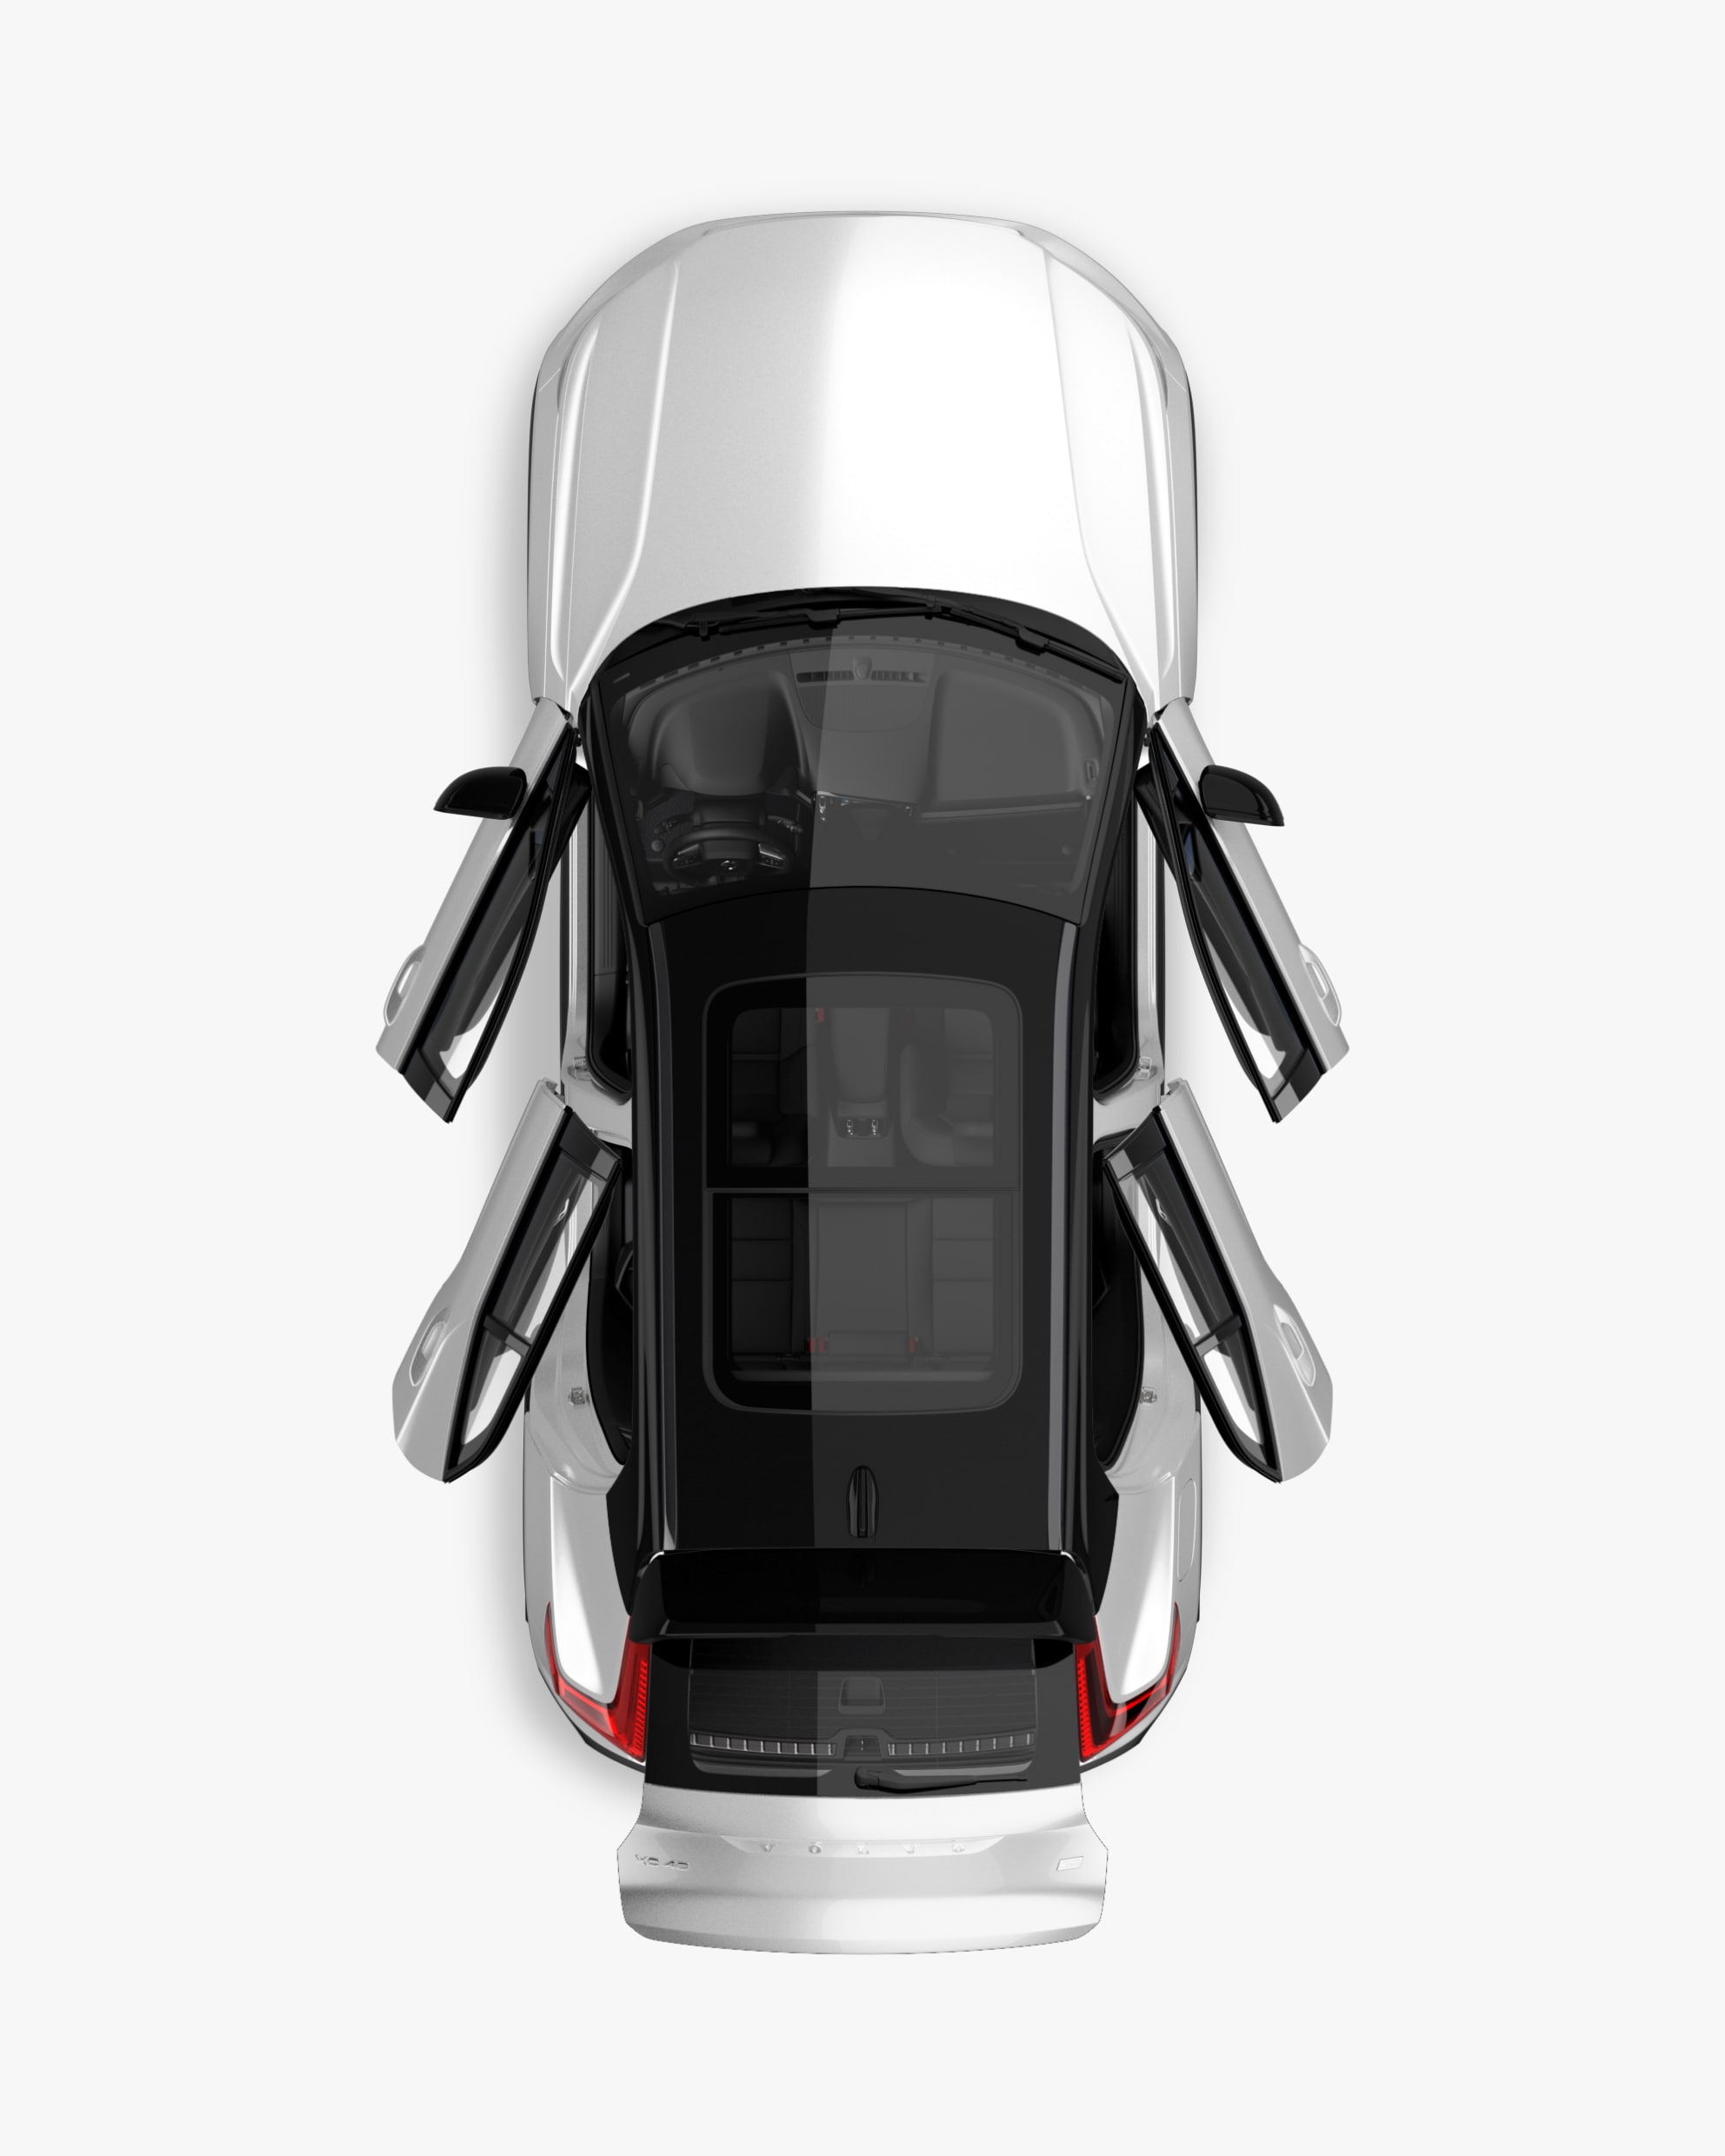 A Volvo XC40 SUV seen from directly above with interior visible.